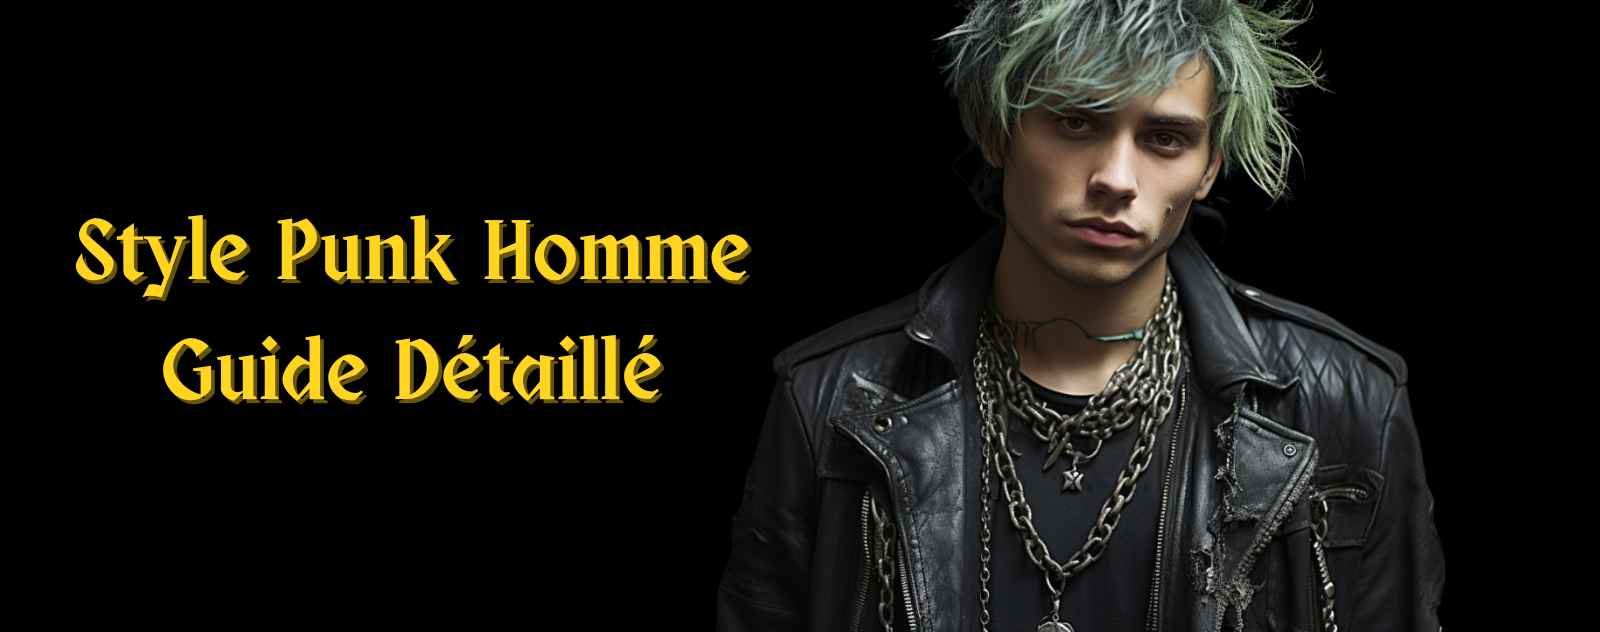 Style Punk Homme